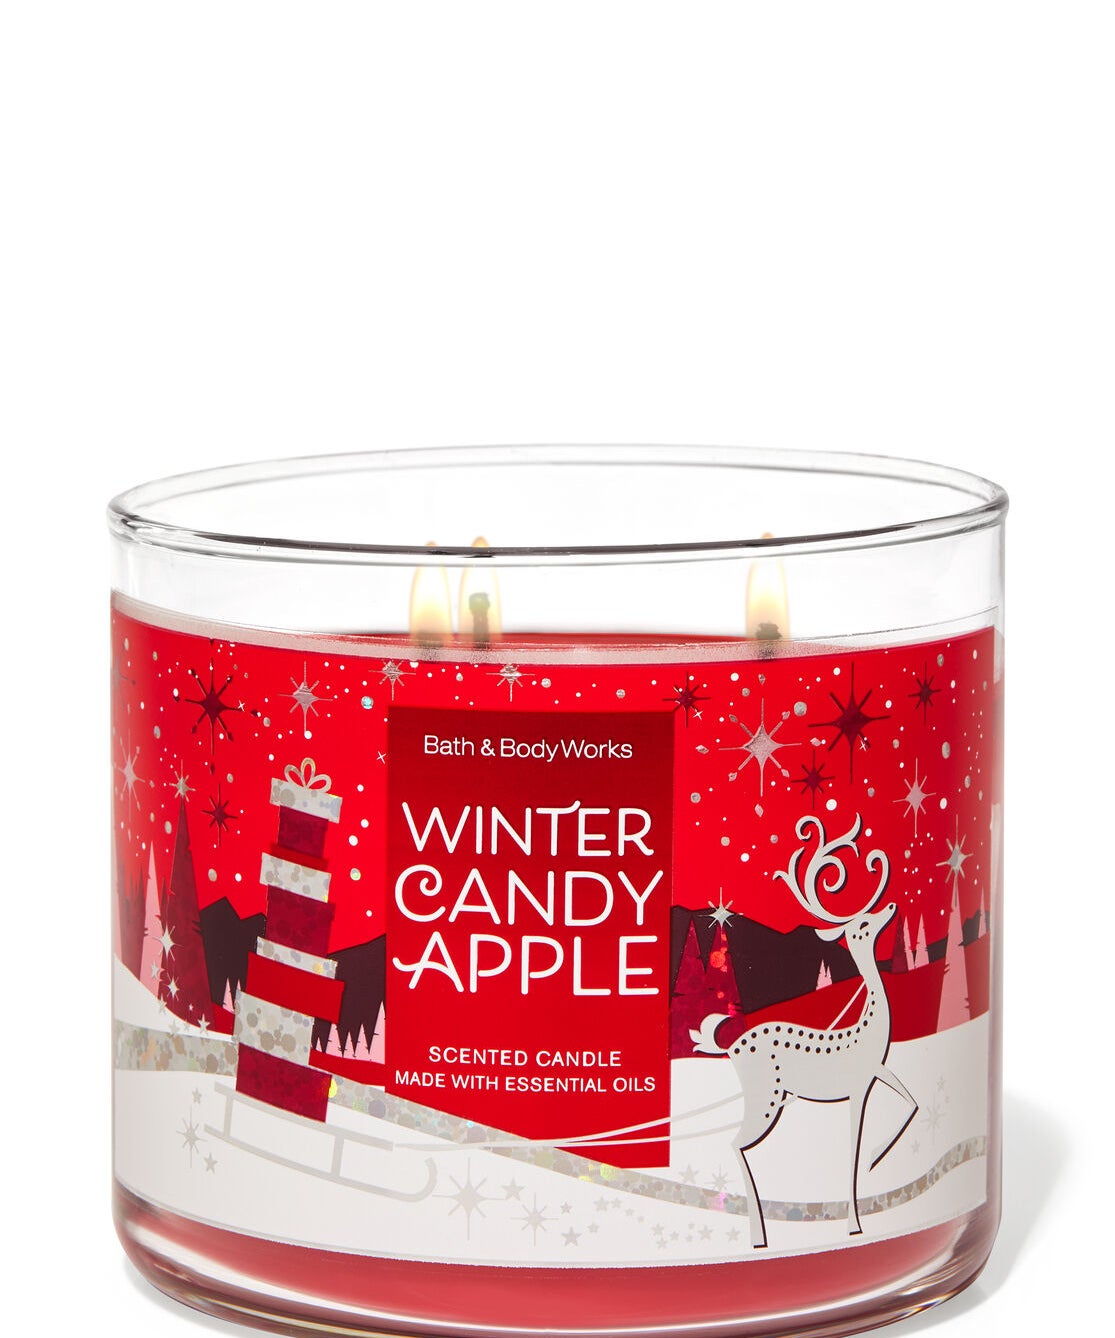 Bath & Body Works Candle Day Sale 2020 Has 9 Candles